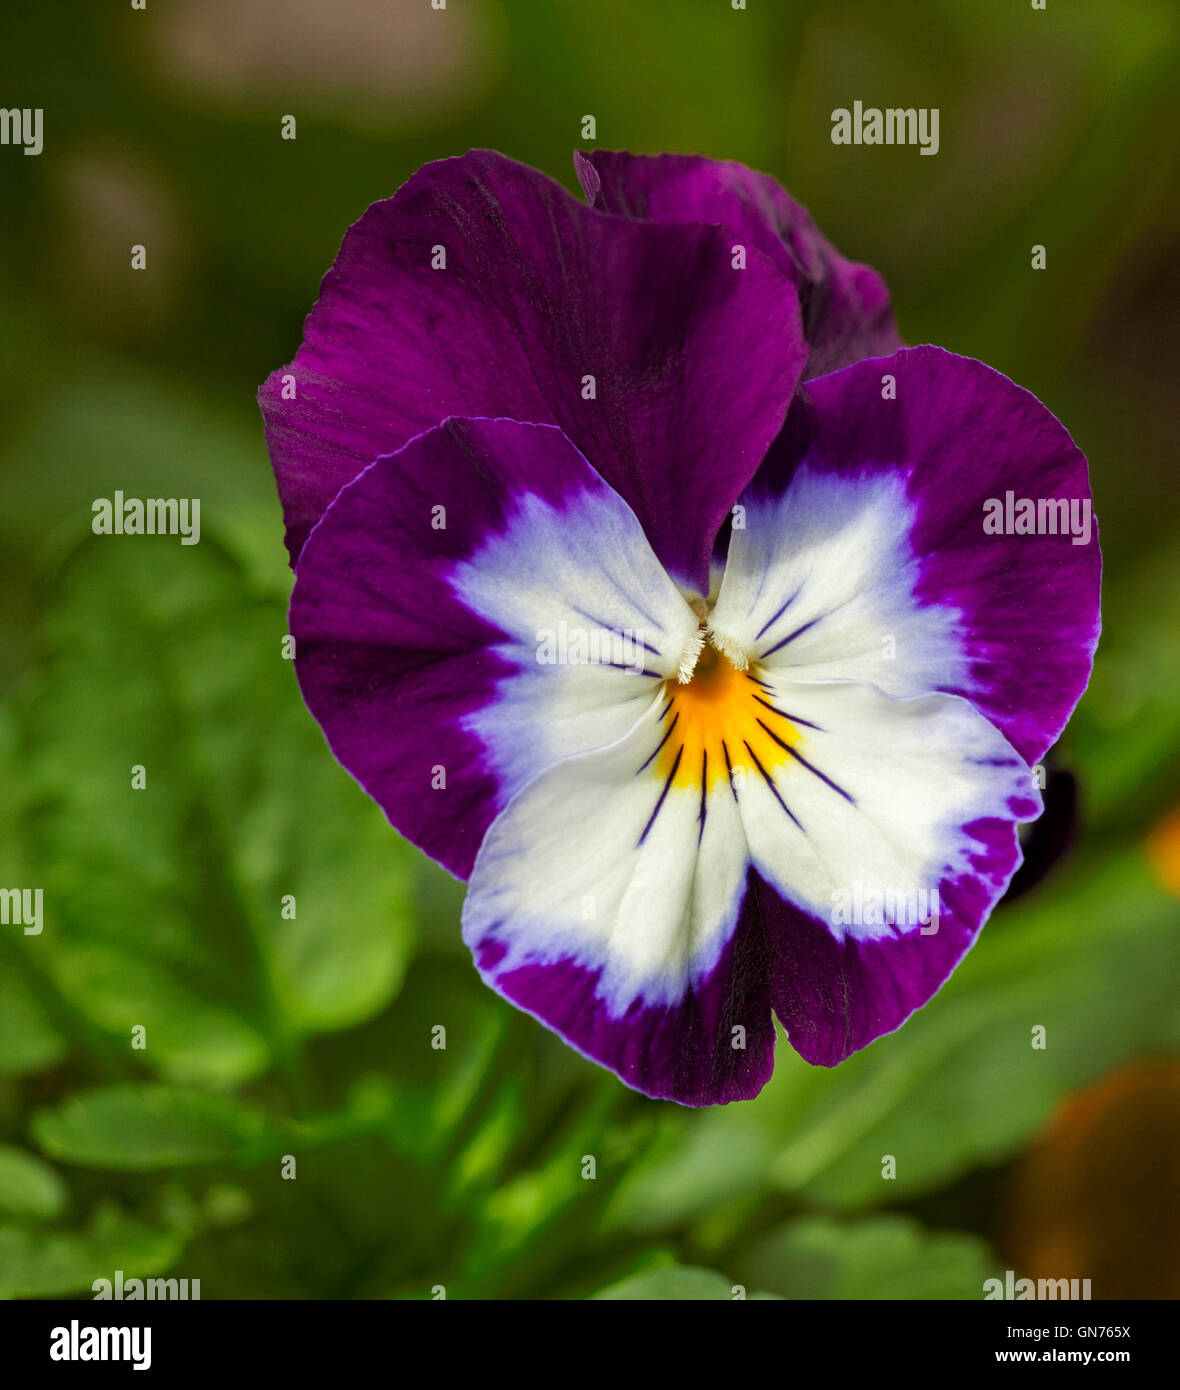 Stunning and unusual vivid purple and white flower of annual viola / pansy with yellow centres on background of green leaves Stock Photo